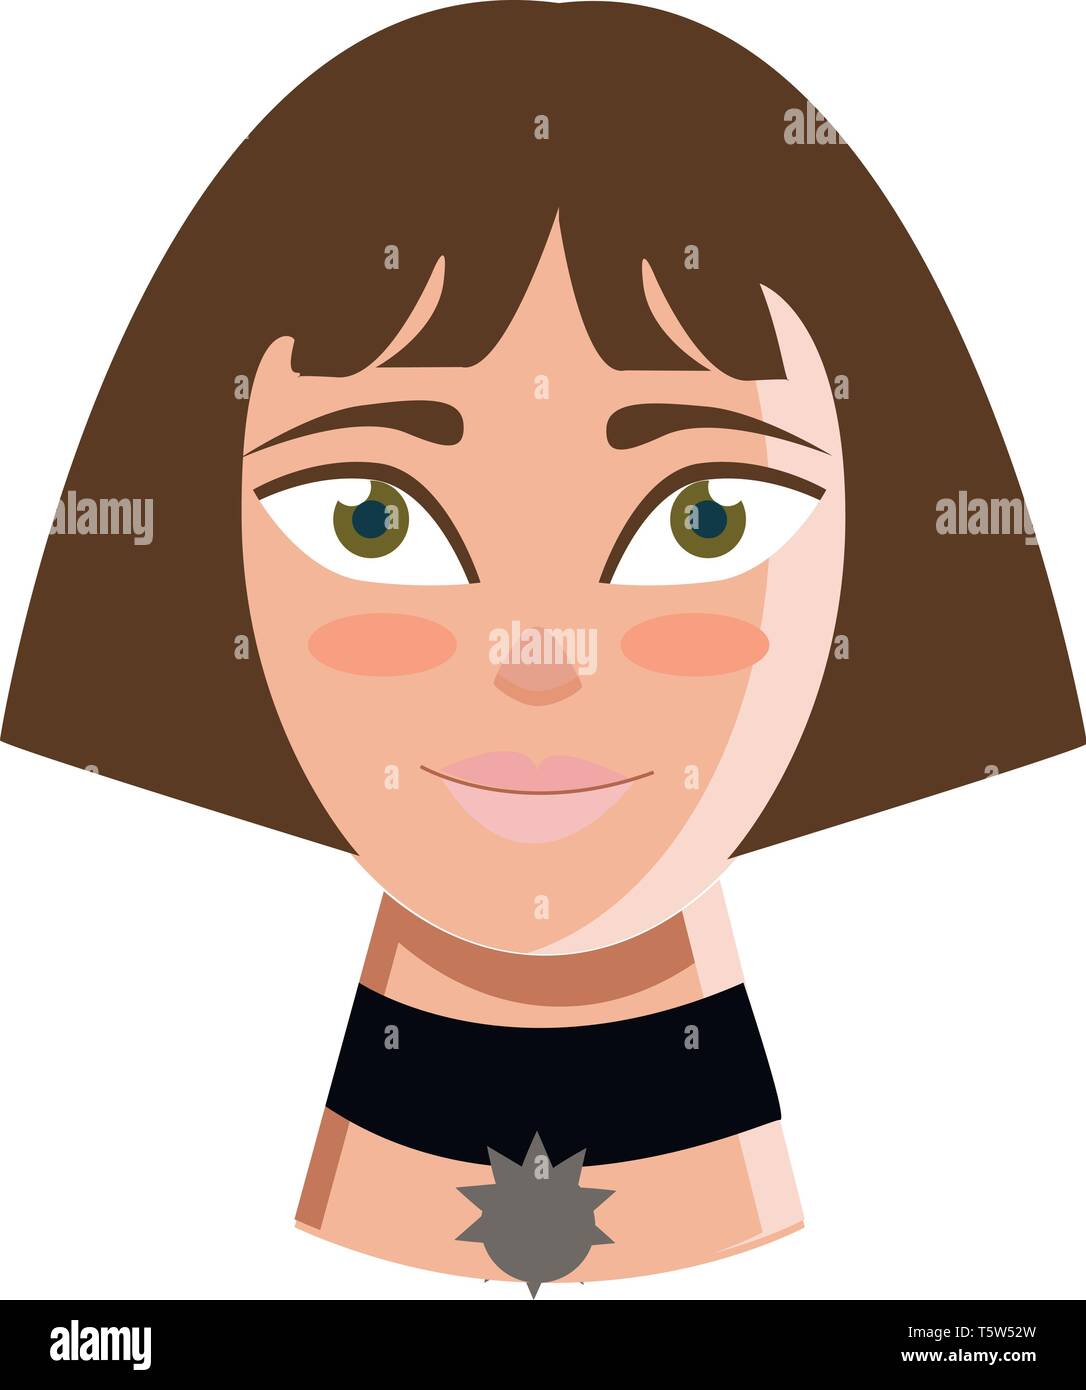 Character matilda Stock Vector Images - Alamy